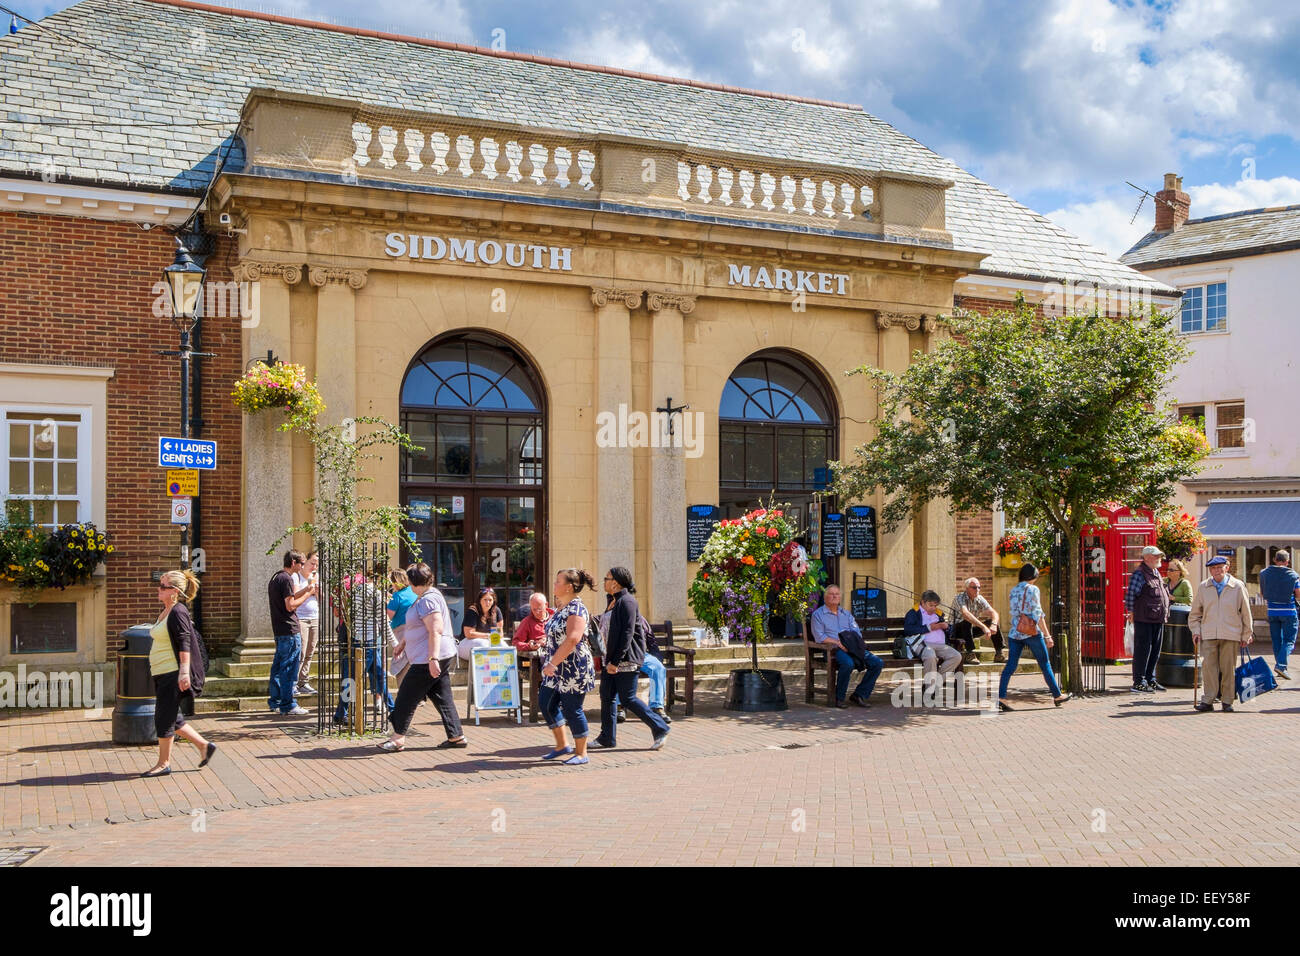 Market hall in Sidmouth, East Devon, England, UK in summer Stock Photo